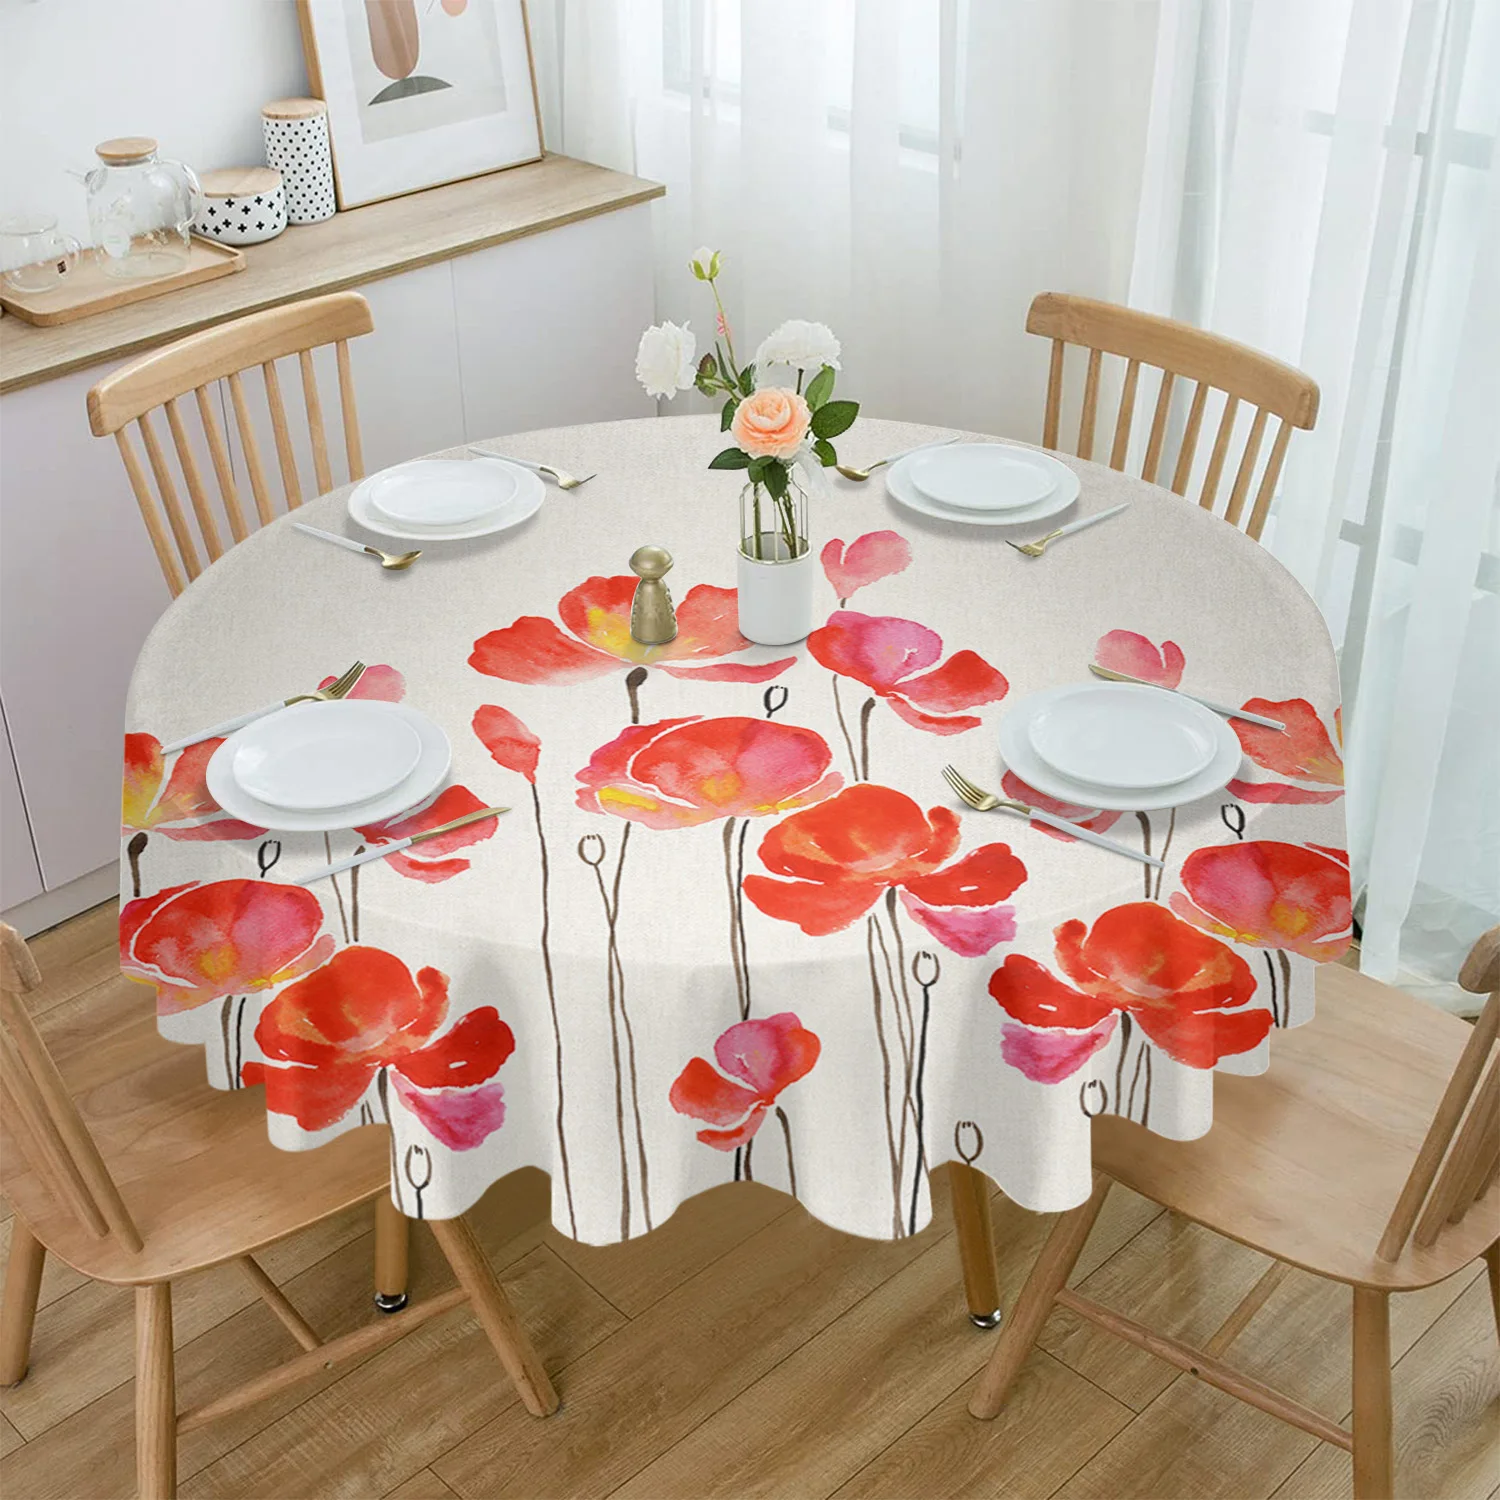 

Red Watercolor Poppy Waterproof Tablecloth Tea Table Decoration Round Table Cover for Kitchen Wedding Party Home Dining Room